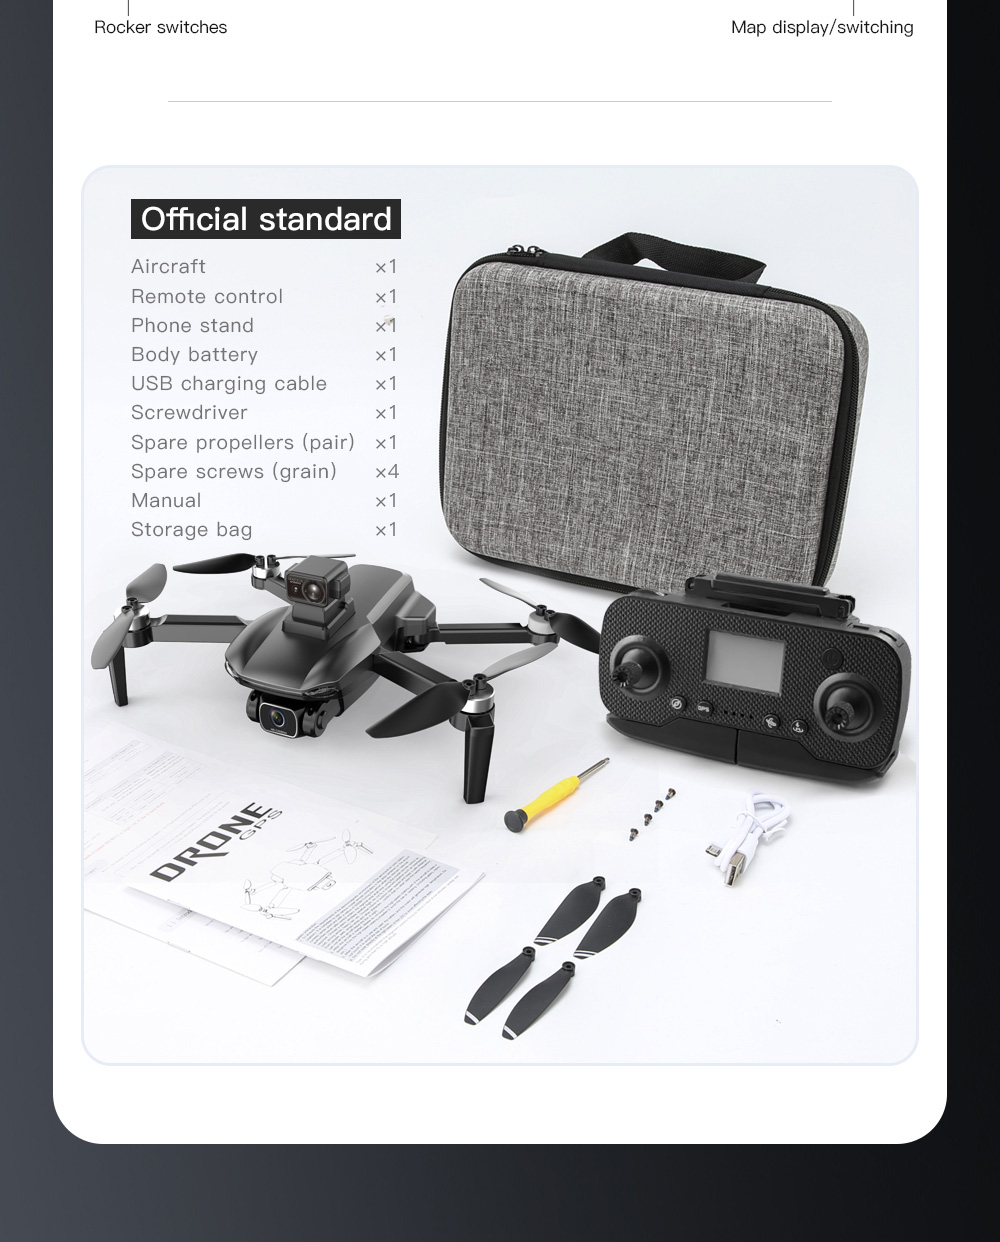 ZLL SG108MAX RC Drone GPS GLONASS 4K@25fps Adjustable Camera with Avoidance 20min Flight Time - Black Two Batteries